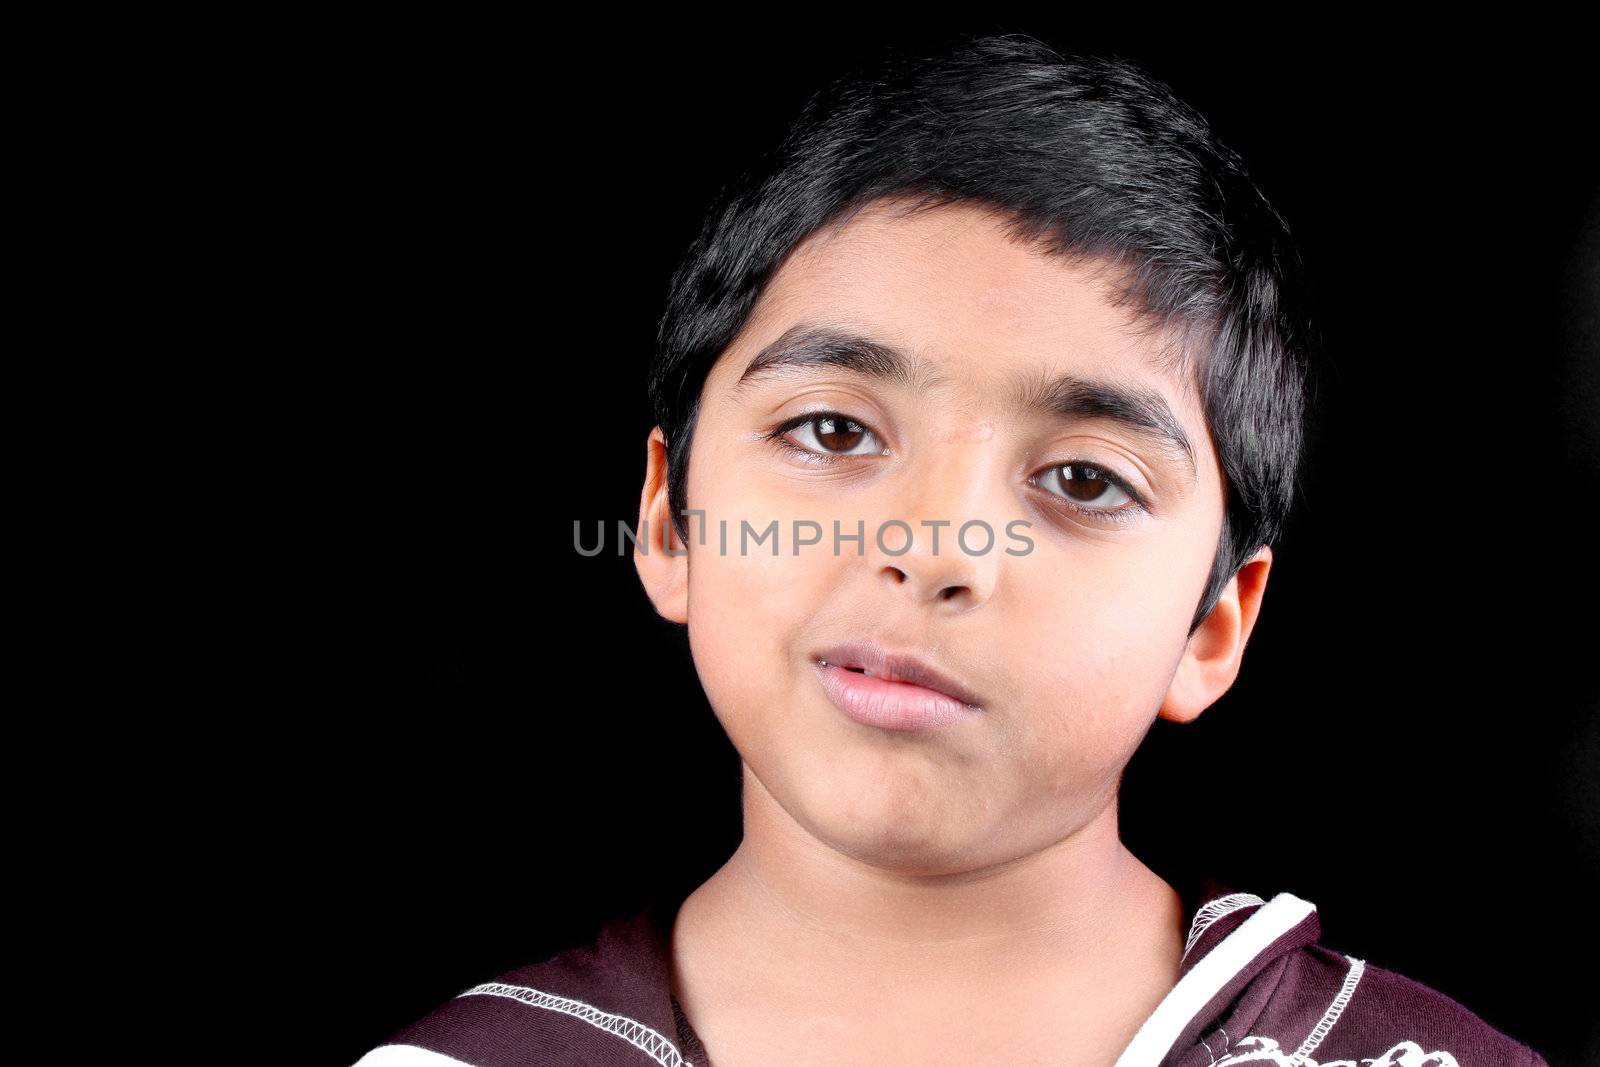 A portrait of an Indian brat with an arrogant expression on his face, on black studio background.